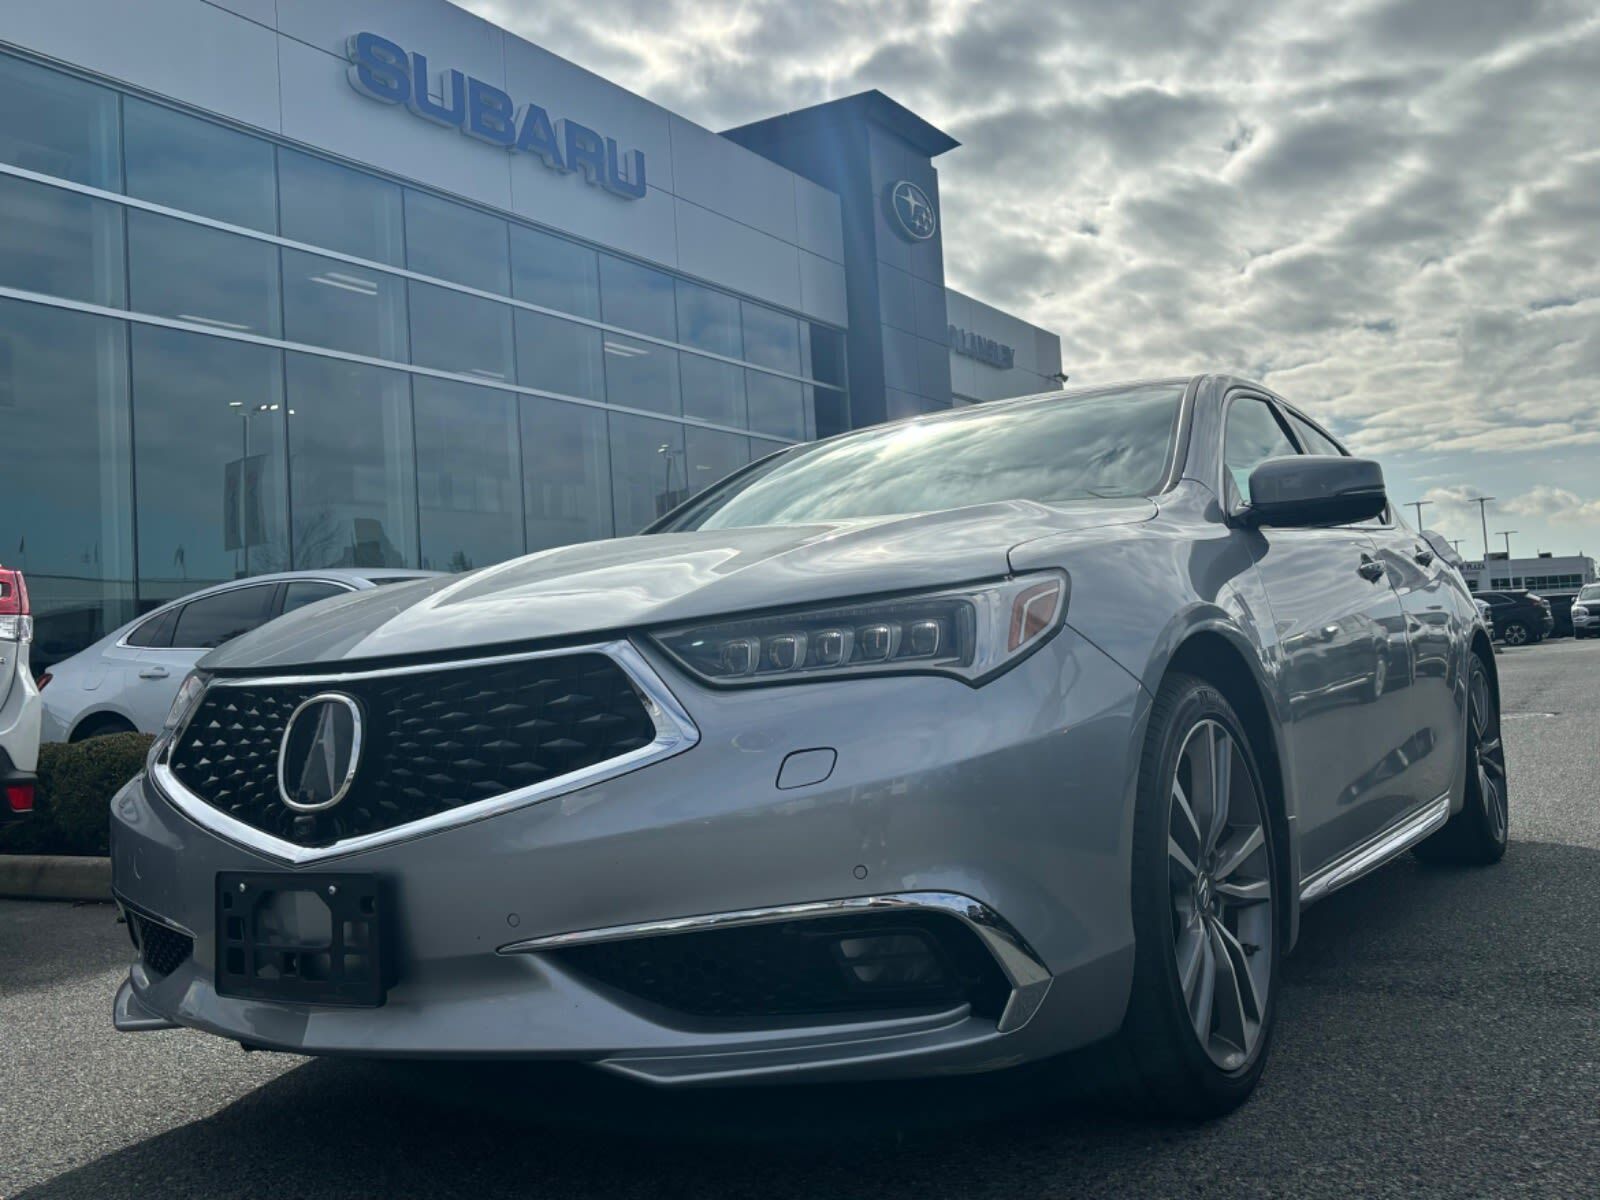 2020 Acura TLX CLEAN CARFAX | AWD | LEATHER SEATS | PUSH TO START